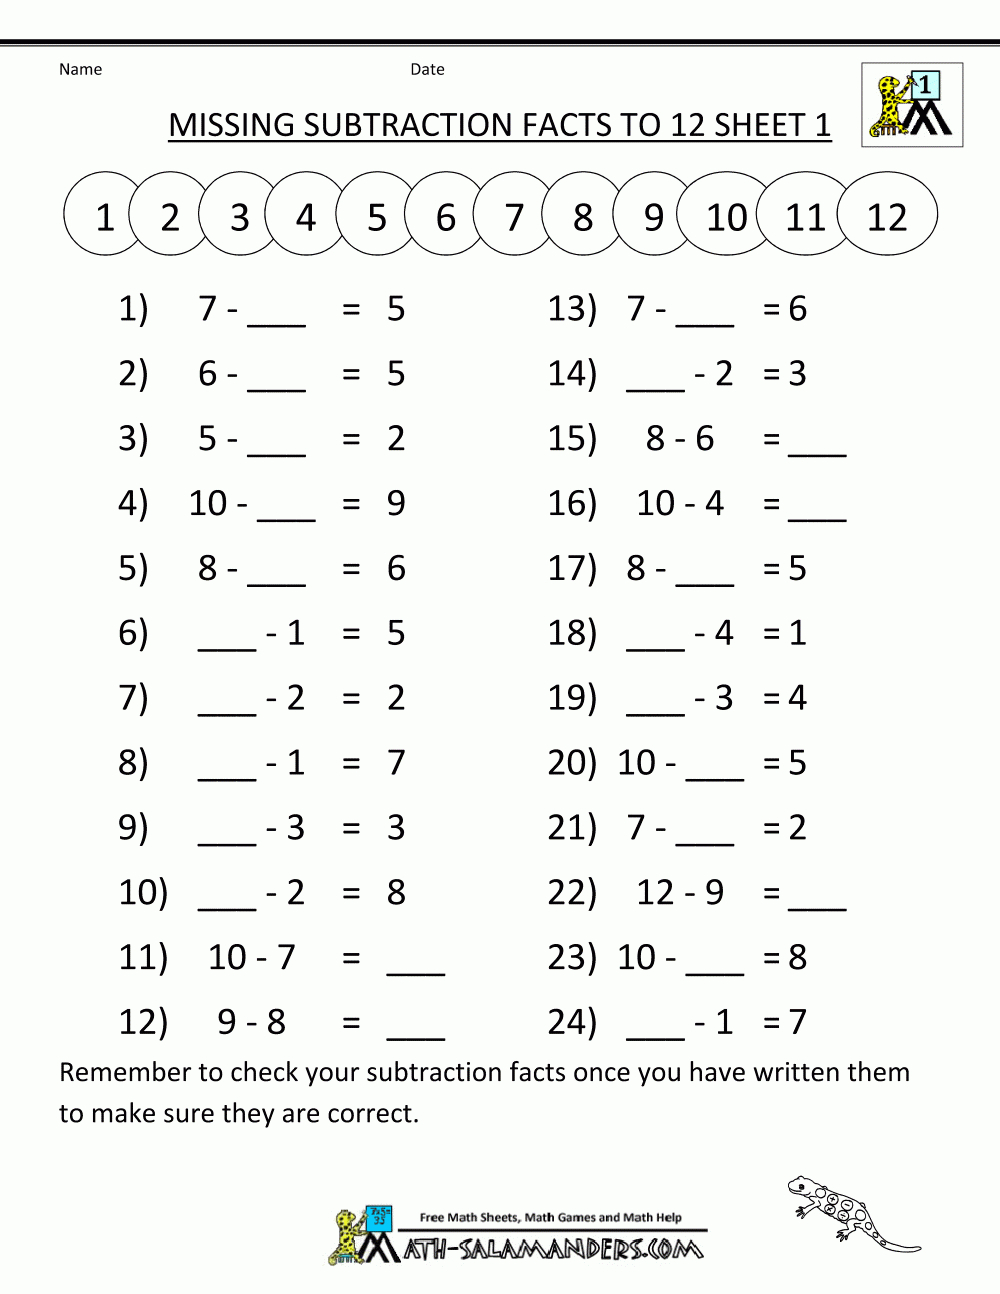 Free Subtraction Worksheets Missing Subtraction Facts To 12 1 - Free Printable Math Worksheets Addition And Subtraction